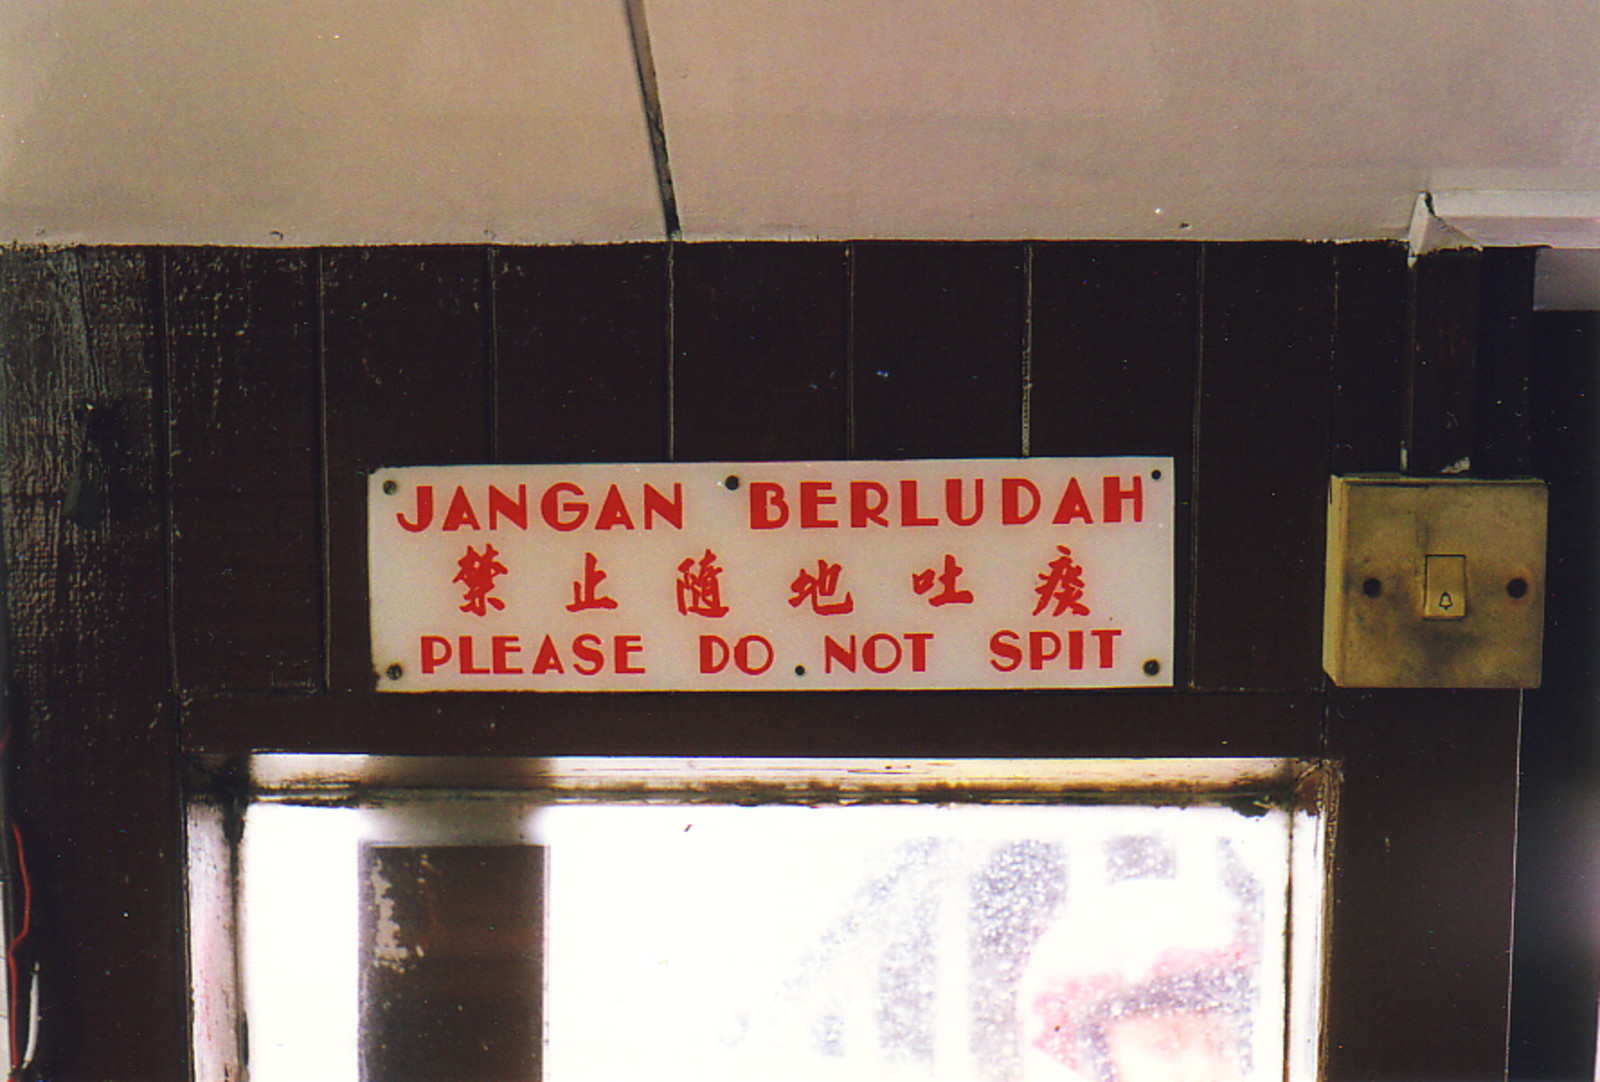 A sign saying 'No spitting' in three languages